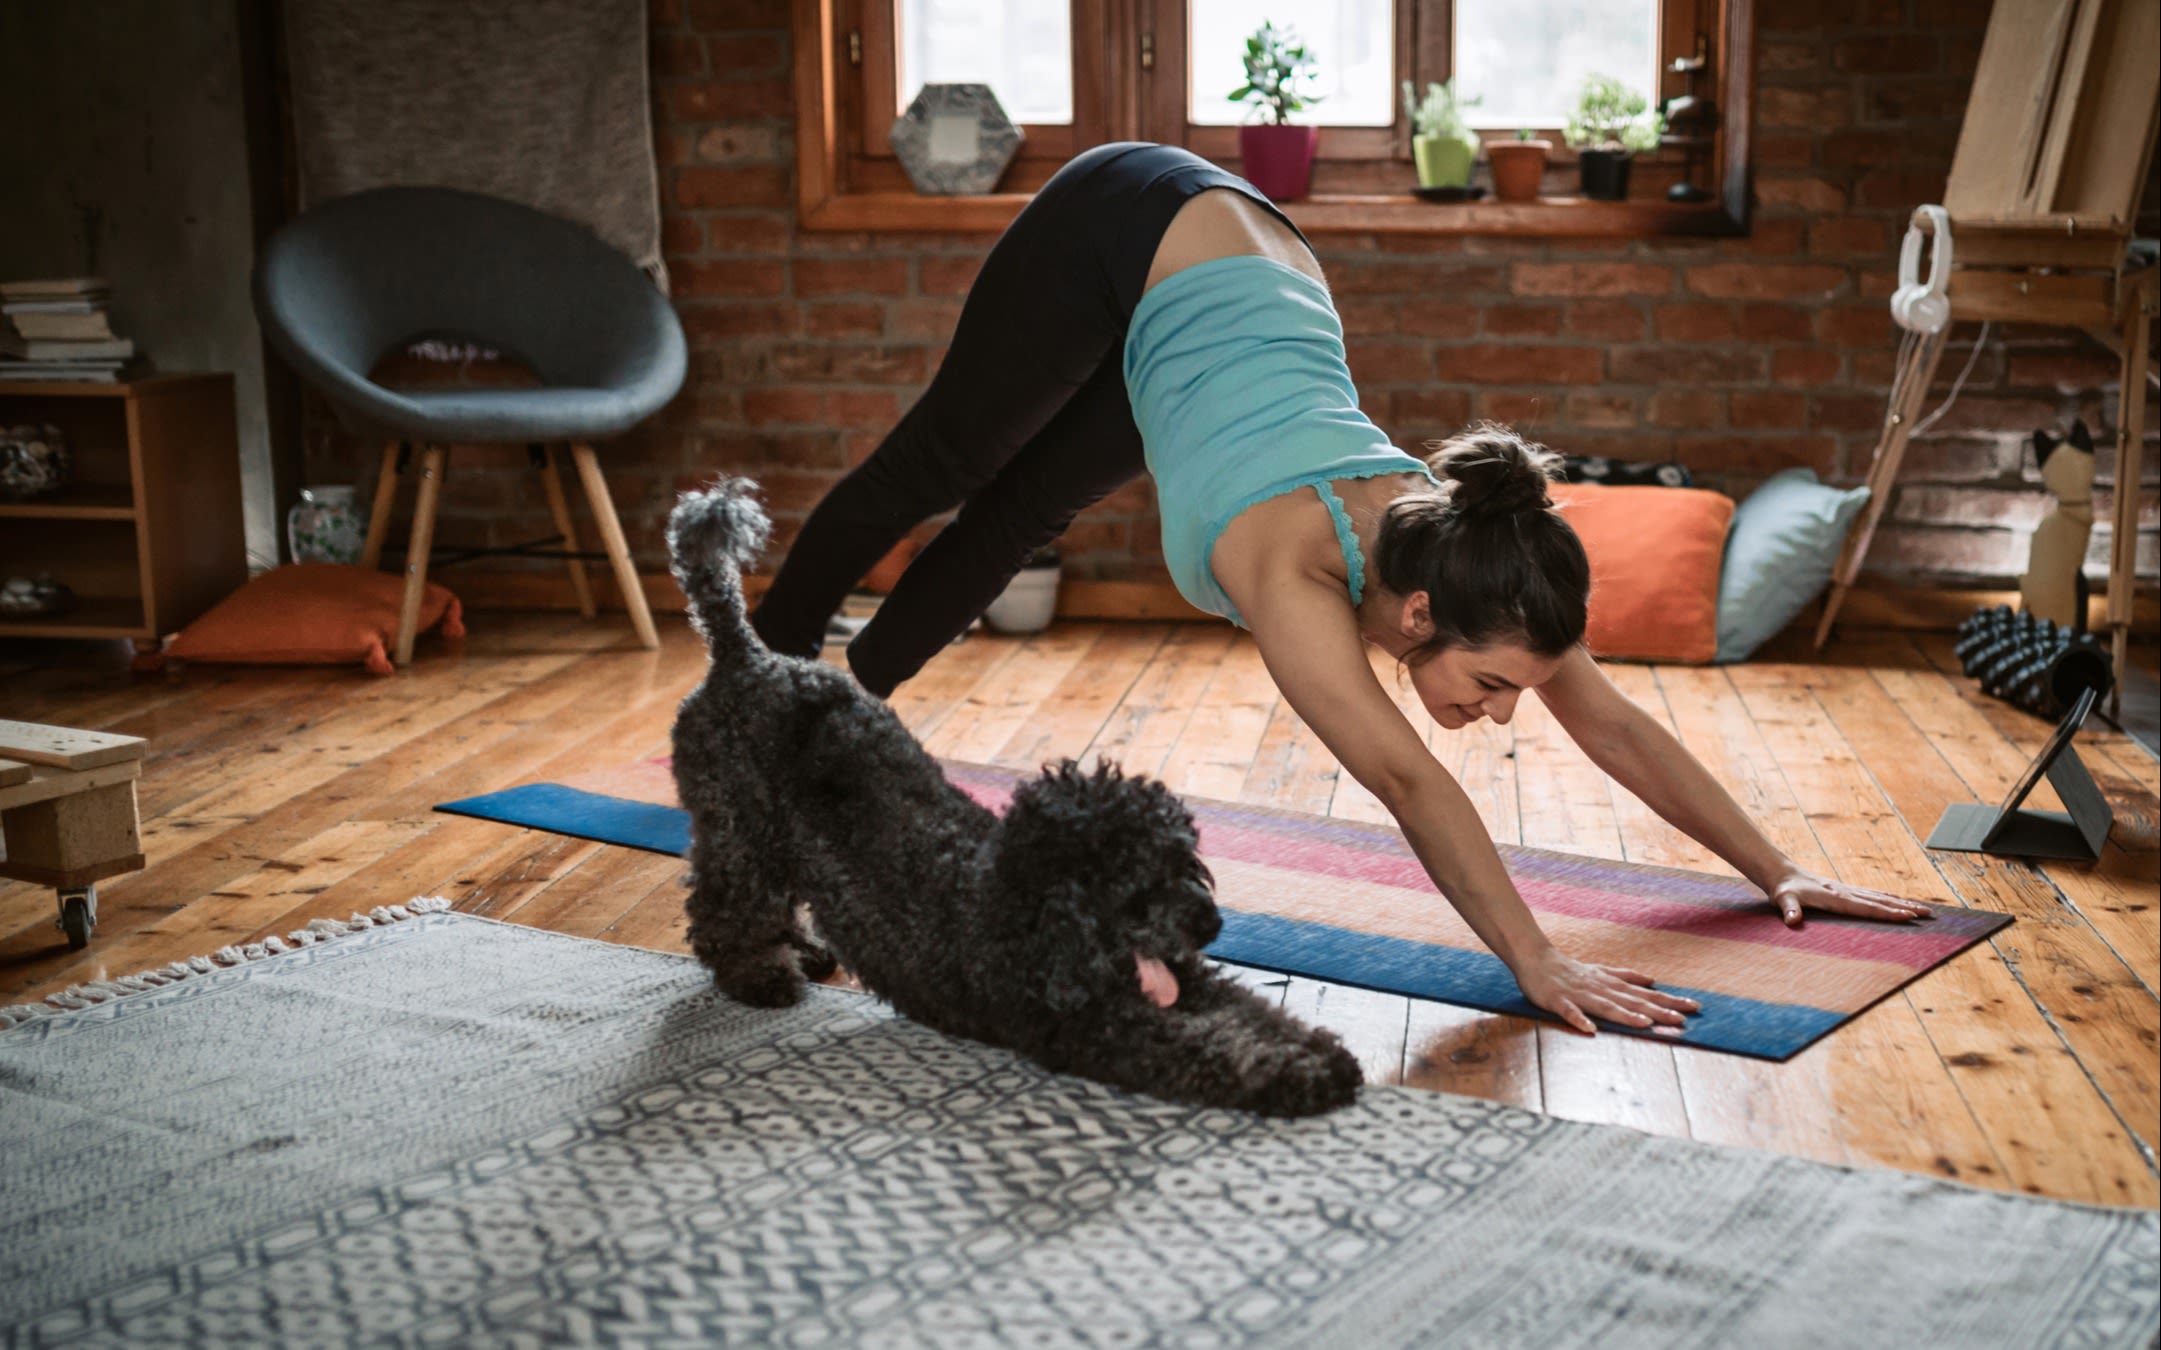 A woman practising yoga at home with her dog